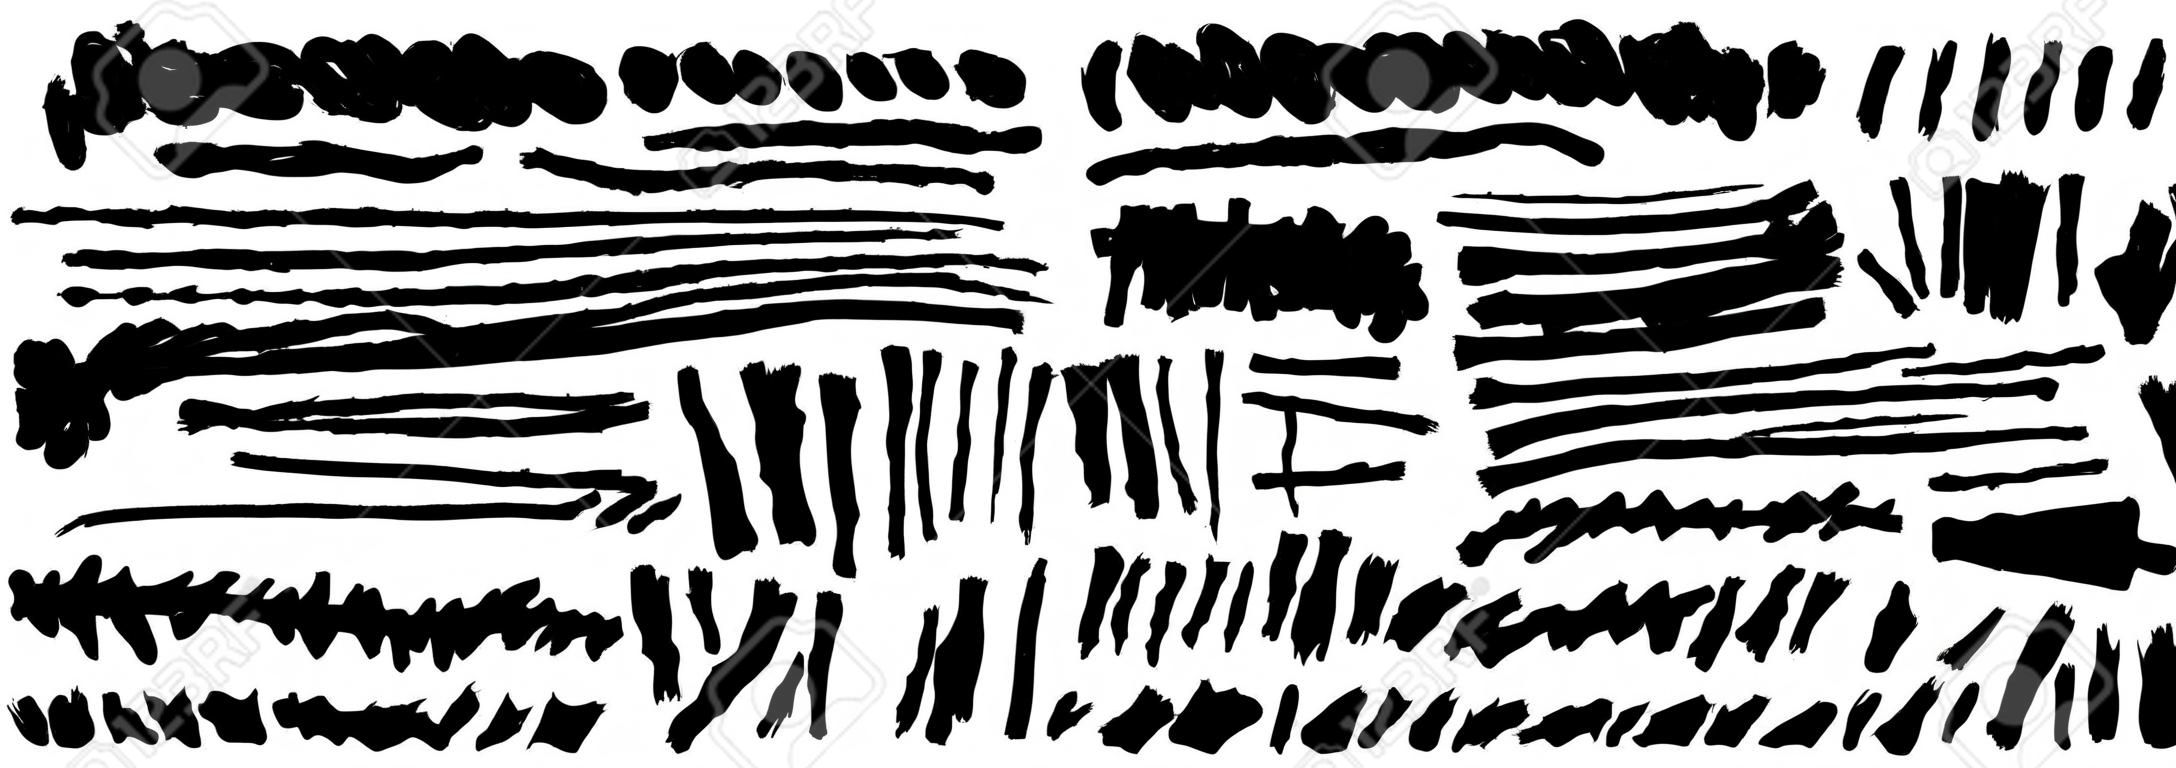 Set of hand draws black paint, ink brush strokes, brushes, lines. Dirty artistic grunge design elements. Vector